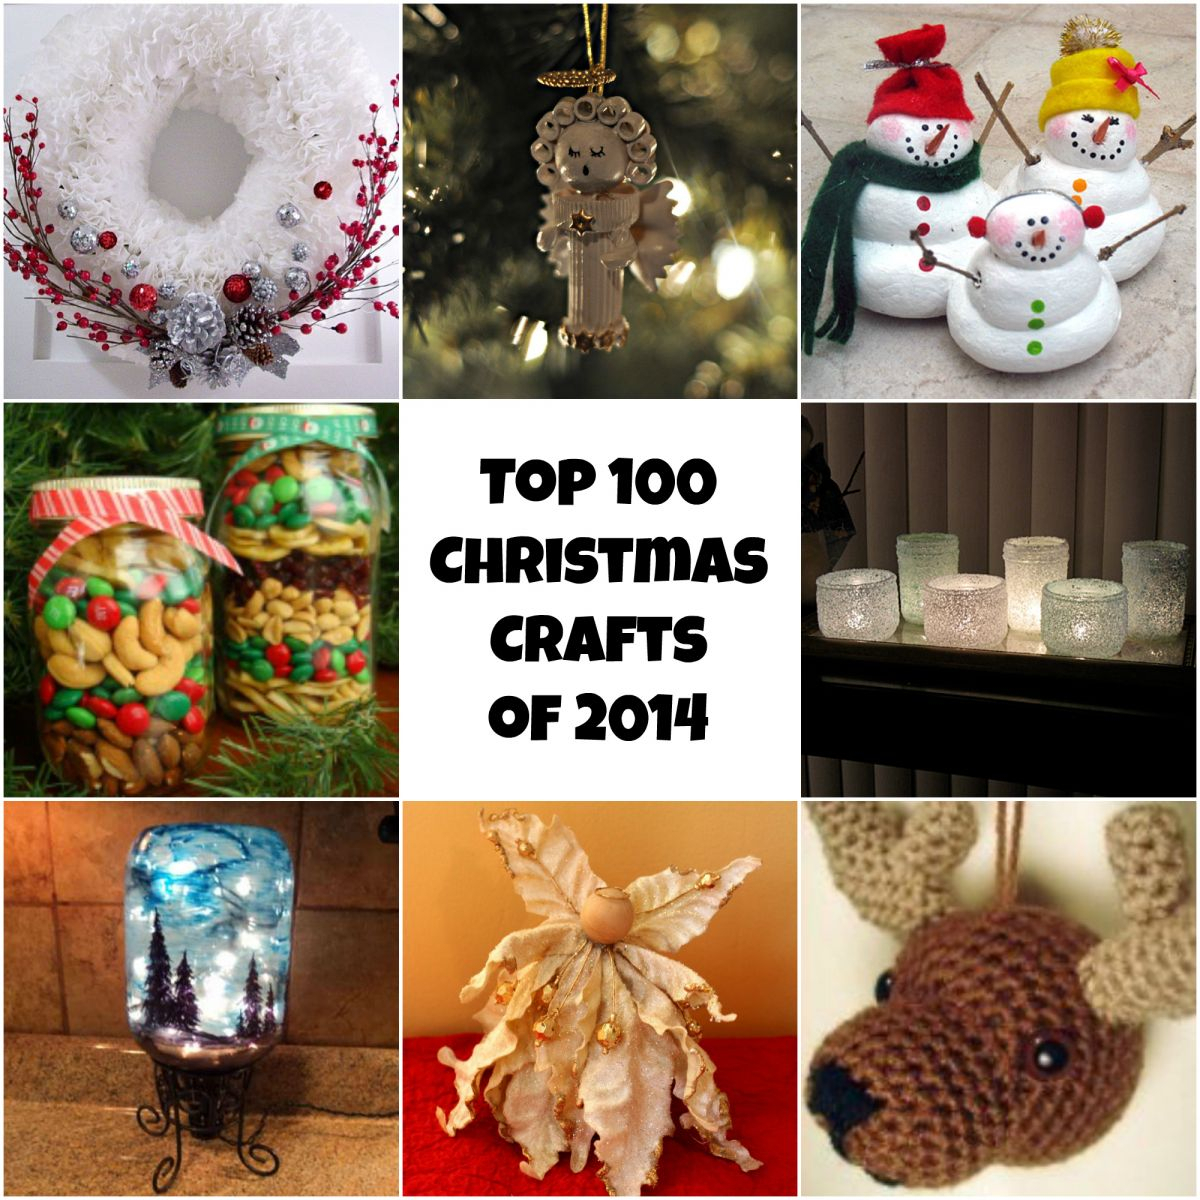 10 Attractive Ideas For Christmas Decorations To Make top 100 diy christmas crafts of 2014 homemade christmas ornaments 13 2024